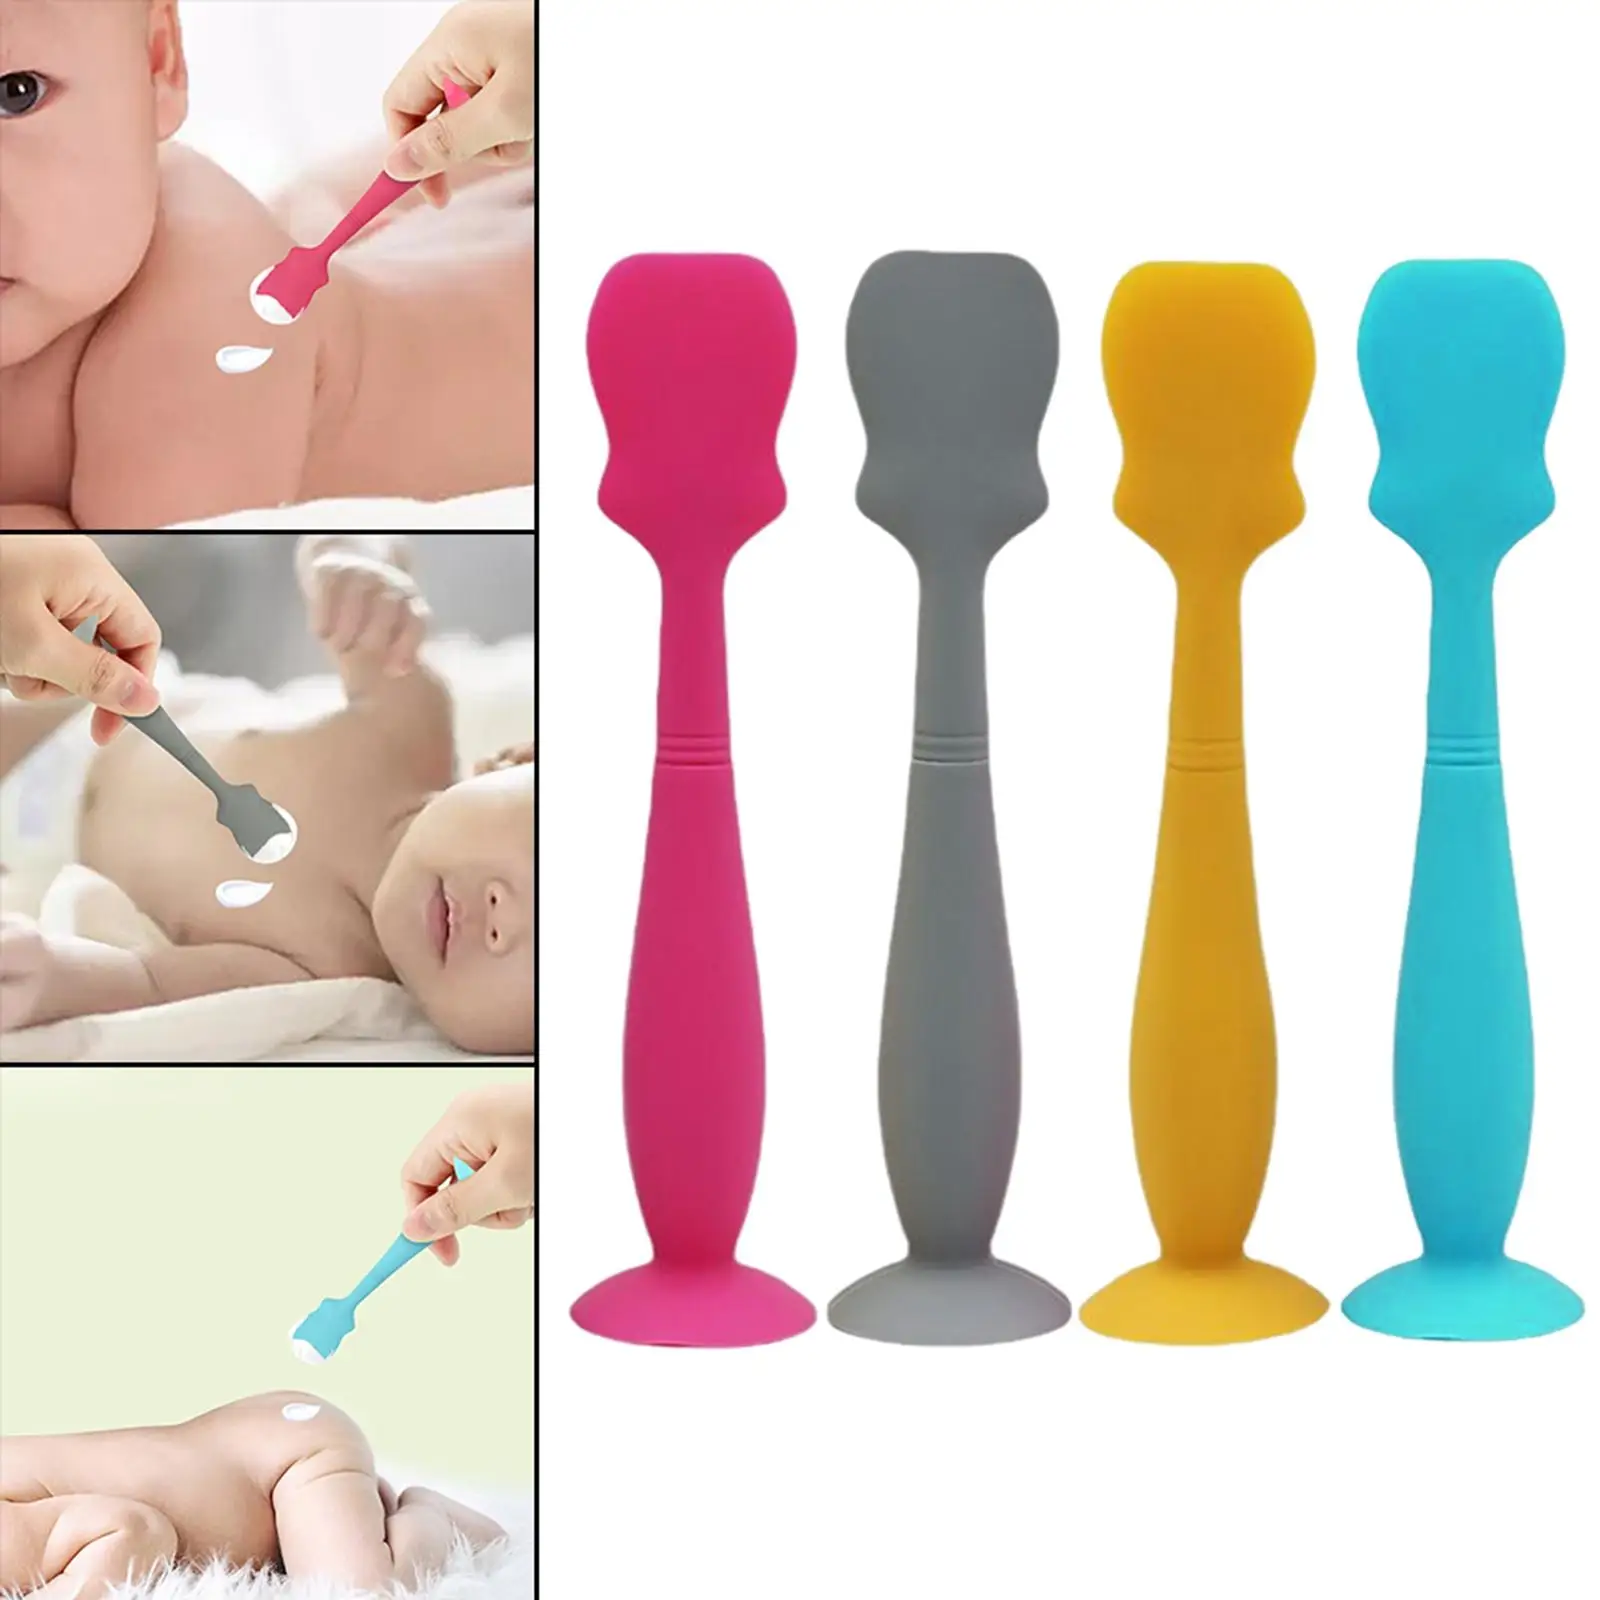 Cream Spatula Applicator Soft with Suction Cup Base Baby Butt Paste Spatula for Kids Boys Newborn